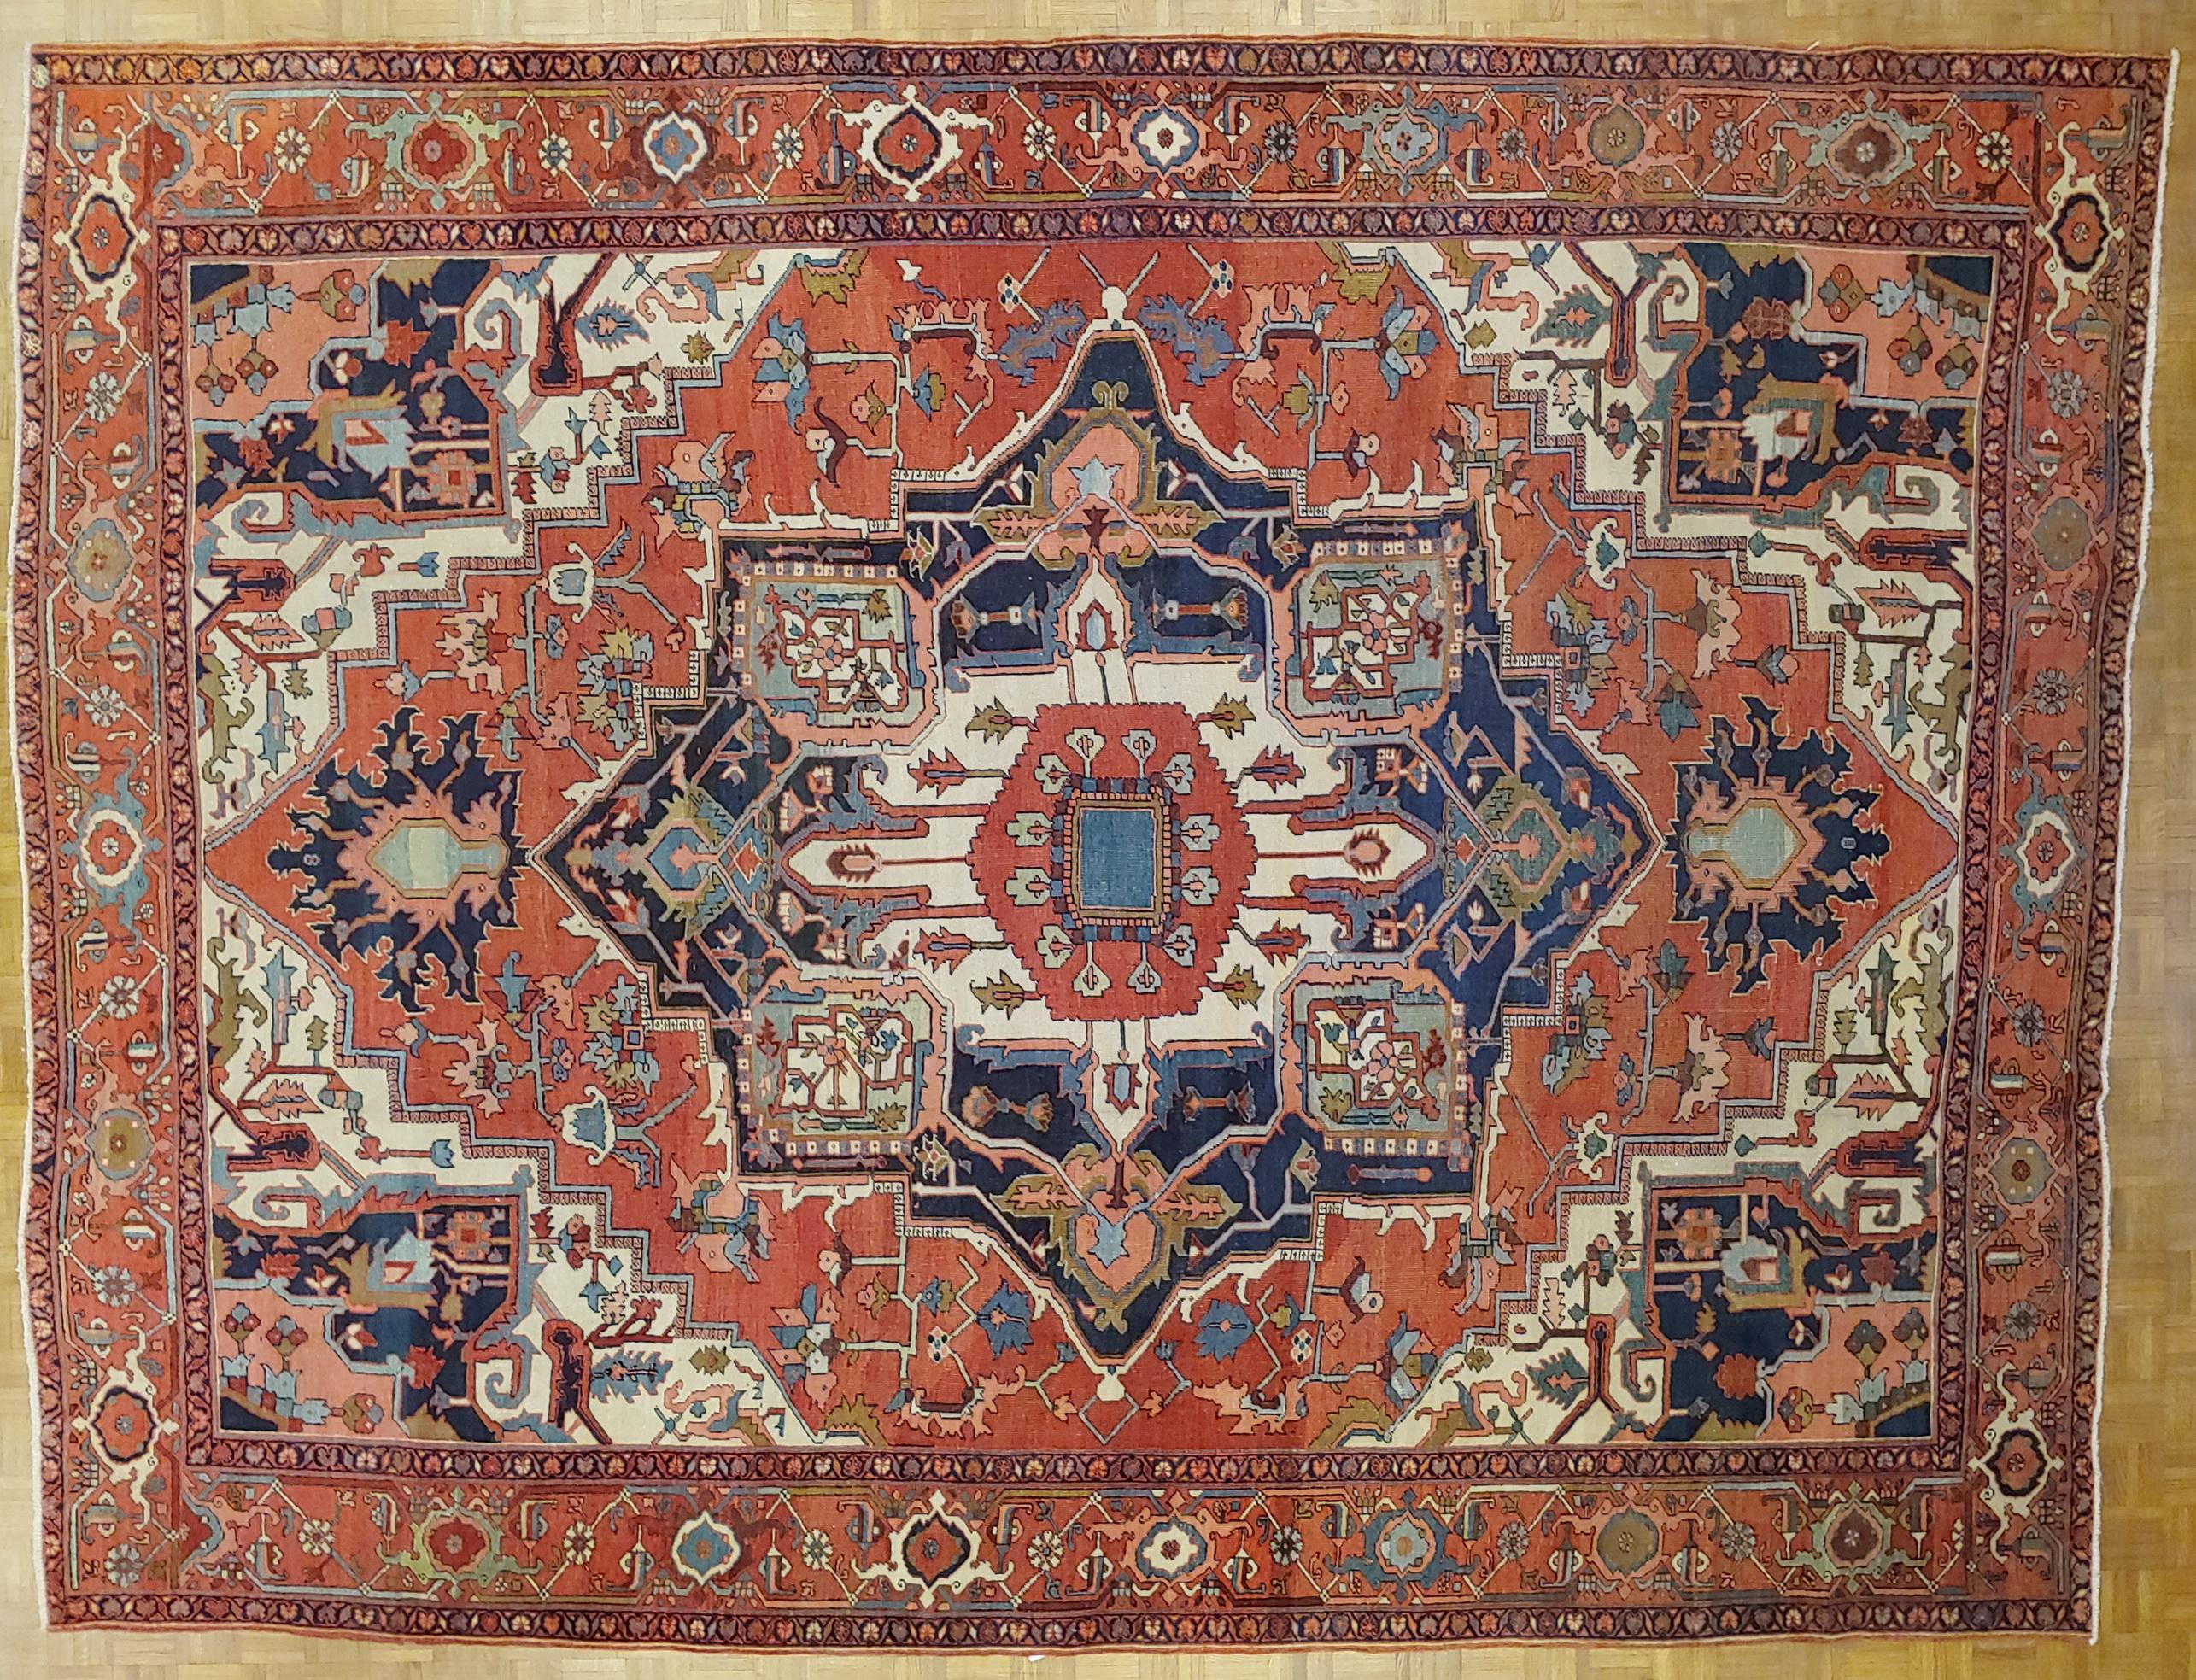 This is a great antique Persian Serapi. These rugs also known as an antique Heriz, because they were woven in the city of Heriz before the transition to busier patterns and brighter colors. This rug has a very stately design with a characteristic